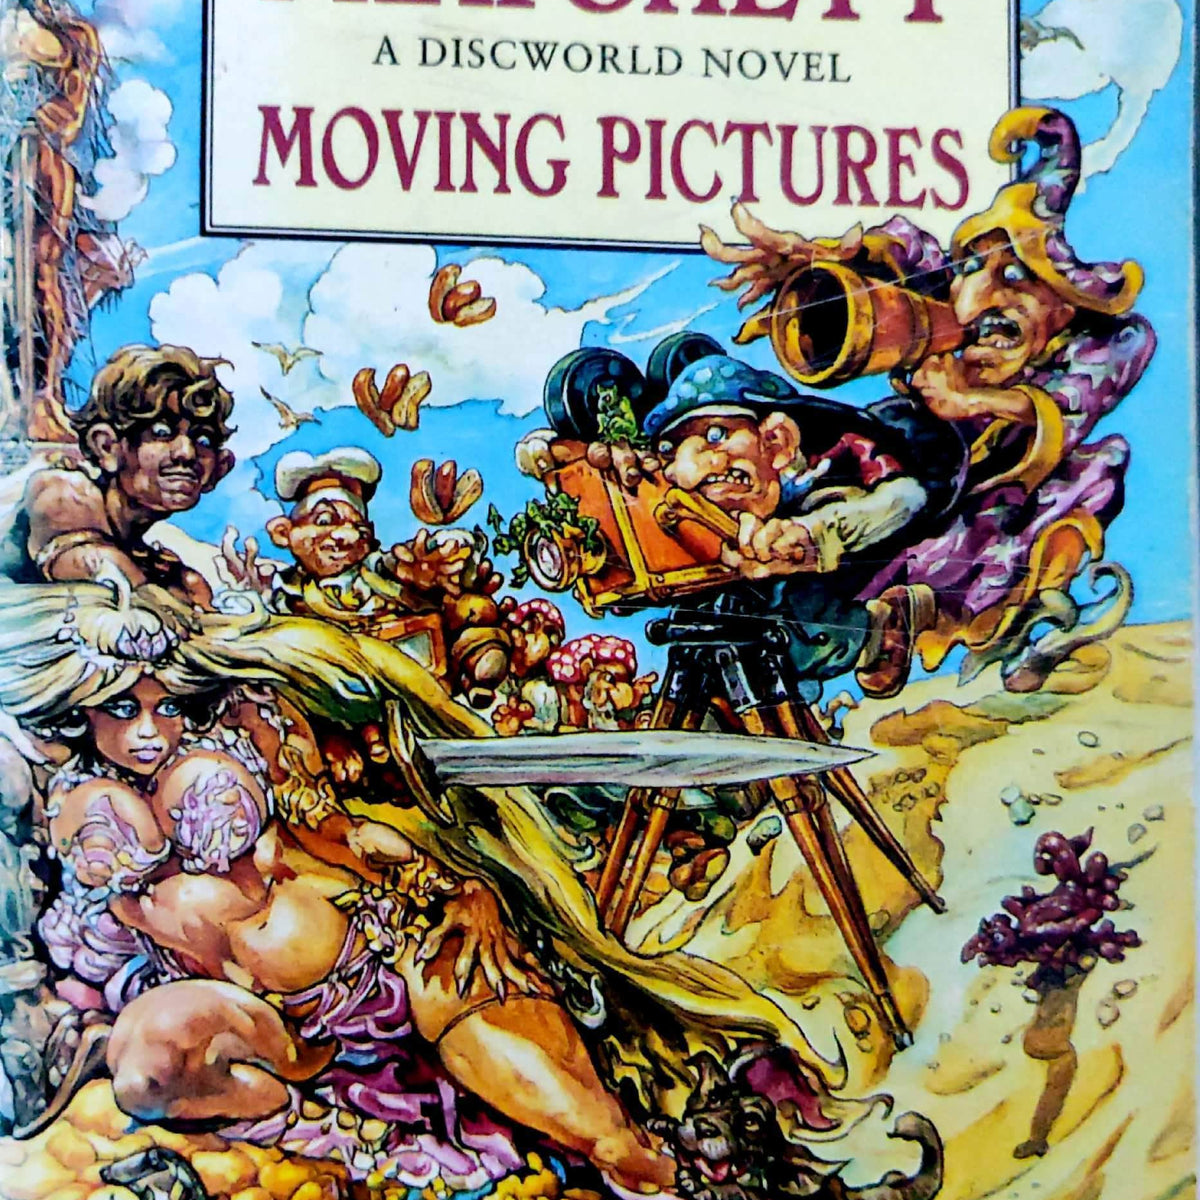 buy-moving-pictures-discworld-10-book-online-at-low-prices-in-india-book-bookish-santa-9780552134637-29379214704835_1200x1200_crop_center.jpg?v=1630922153